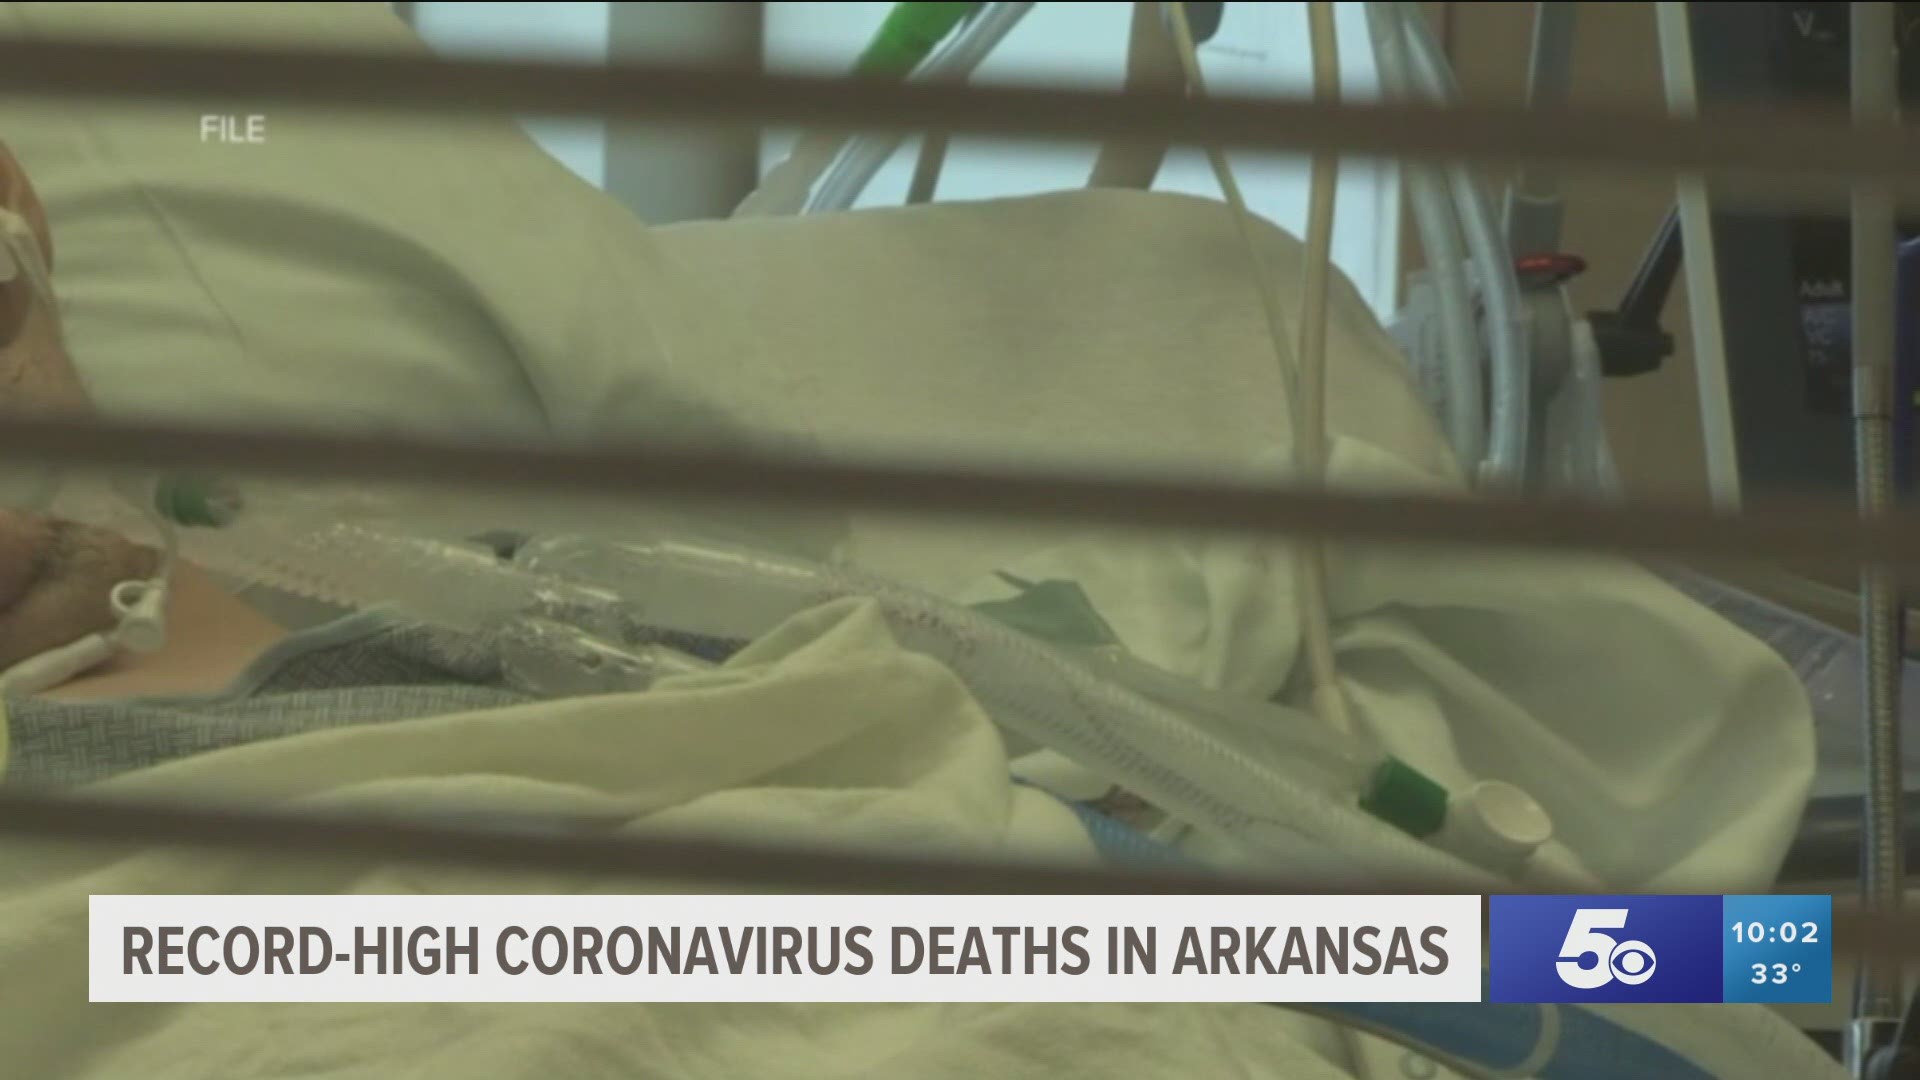 Arkansas reported 53 new covid-related deaths on Monday, a single-day record for the state.